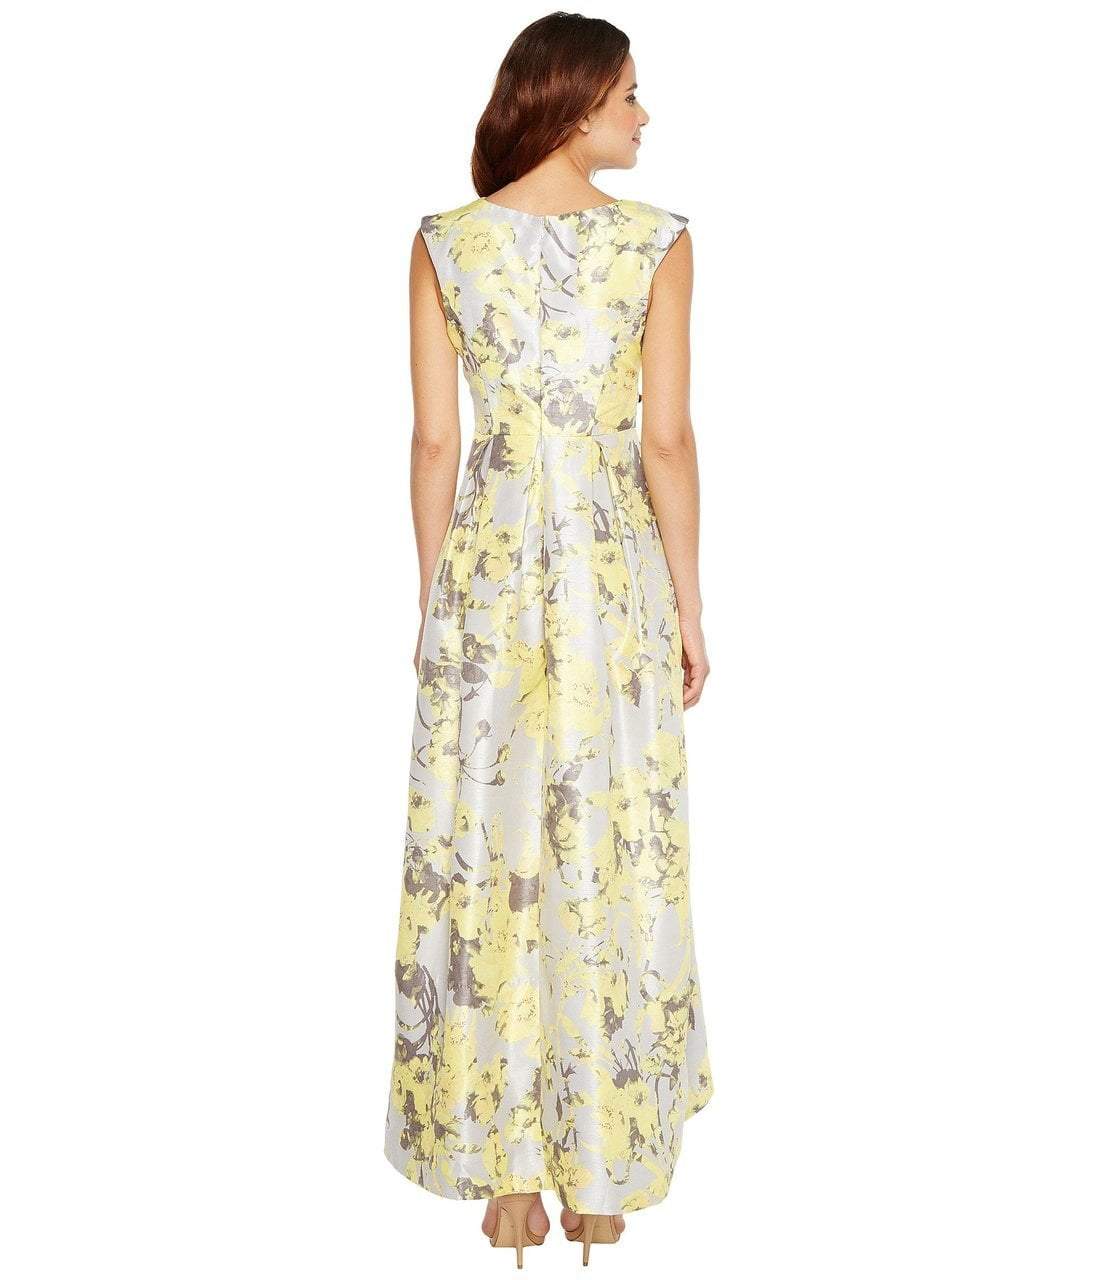 Sangria - SBHW964 Cap Sleeve Floral Shantung Dress in Yellow and Floral